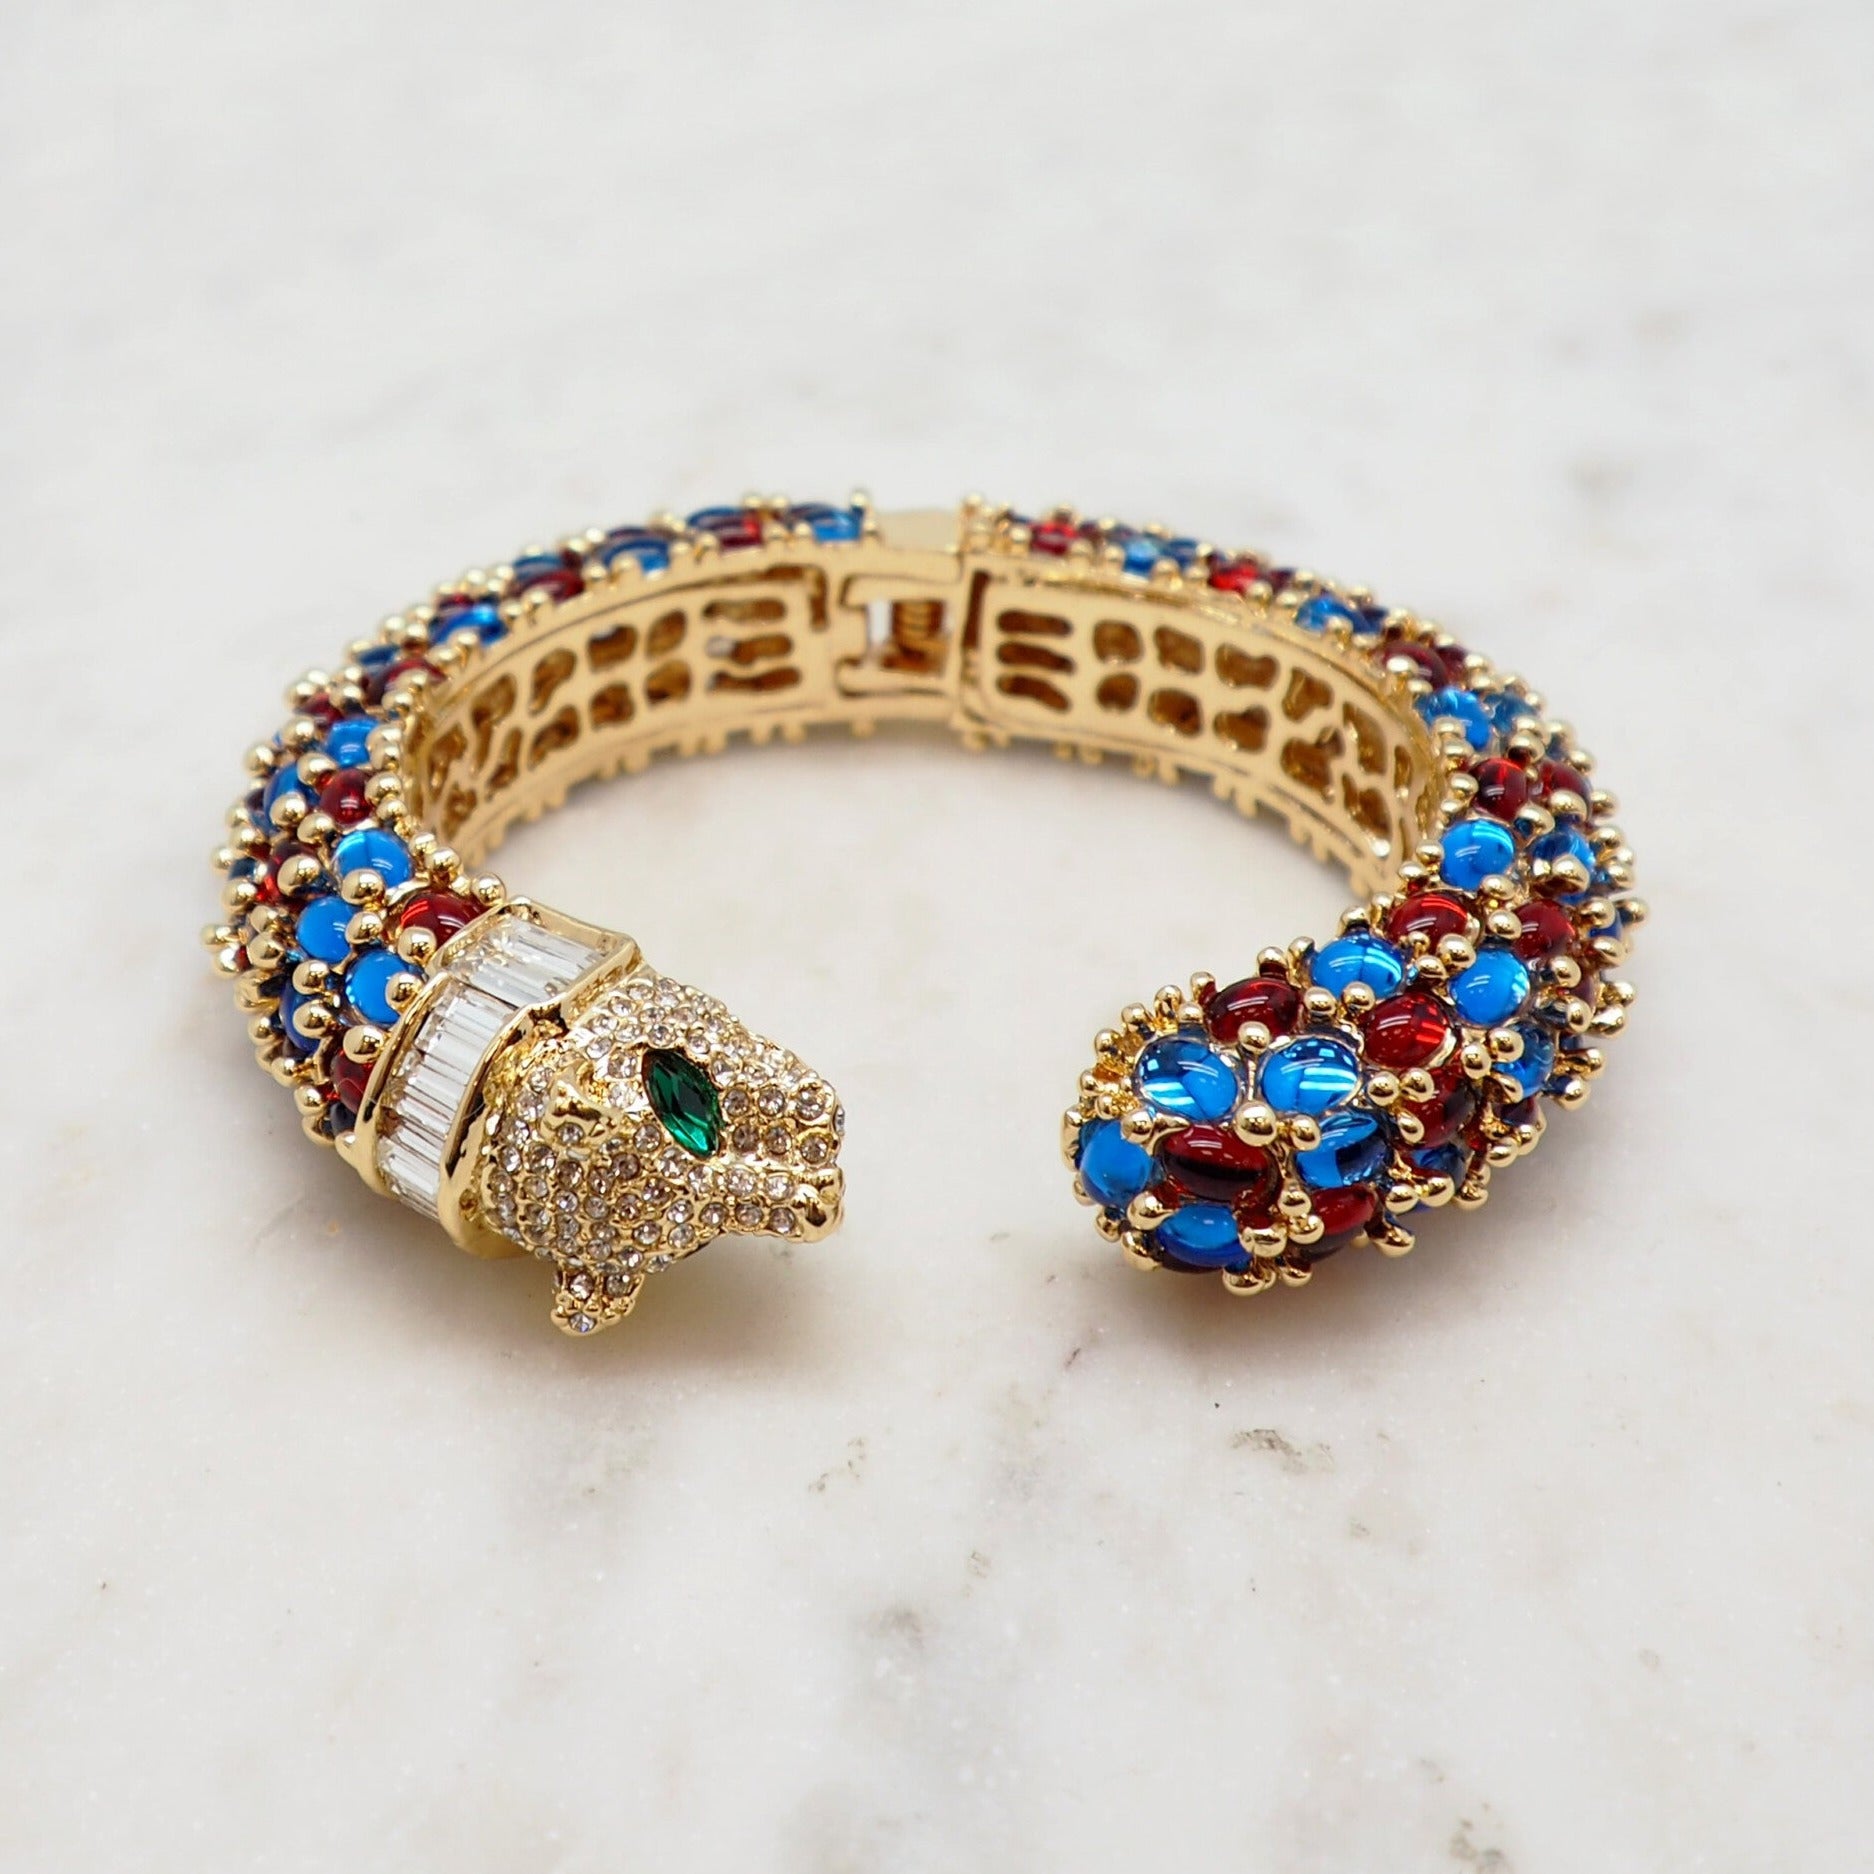 The Tiger Bangle - Blue and Red